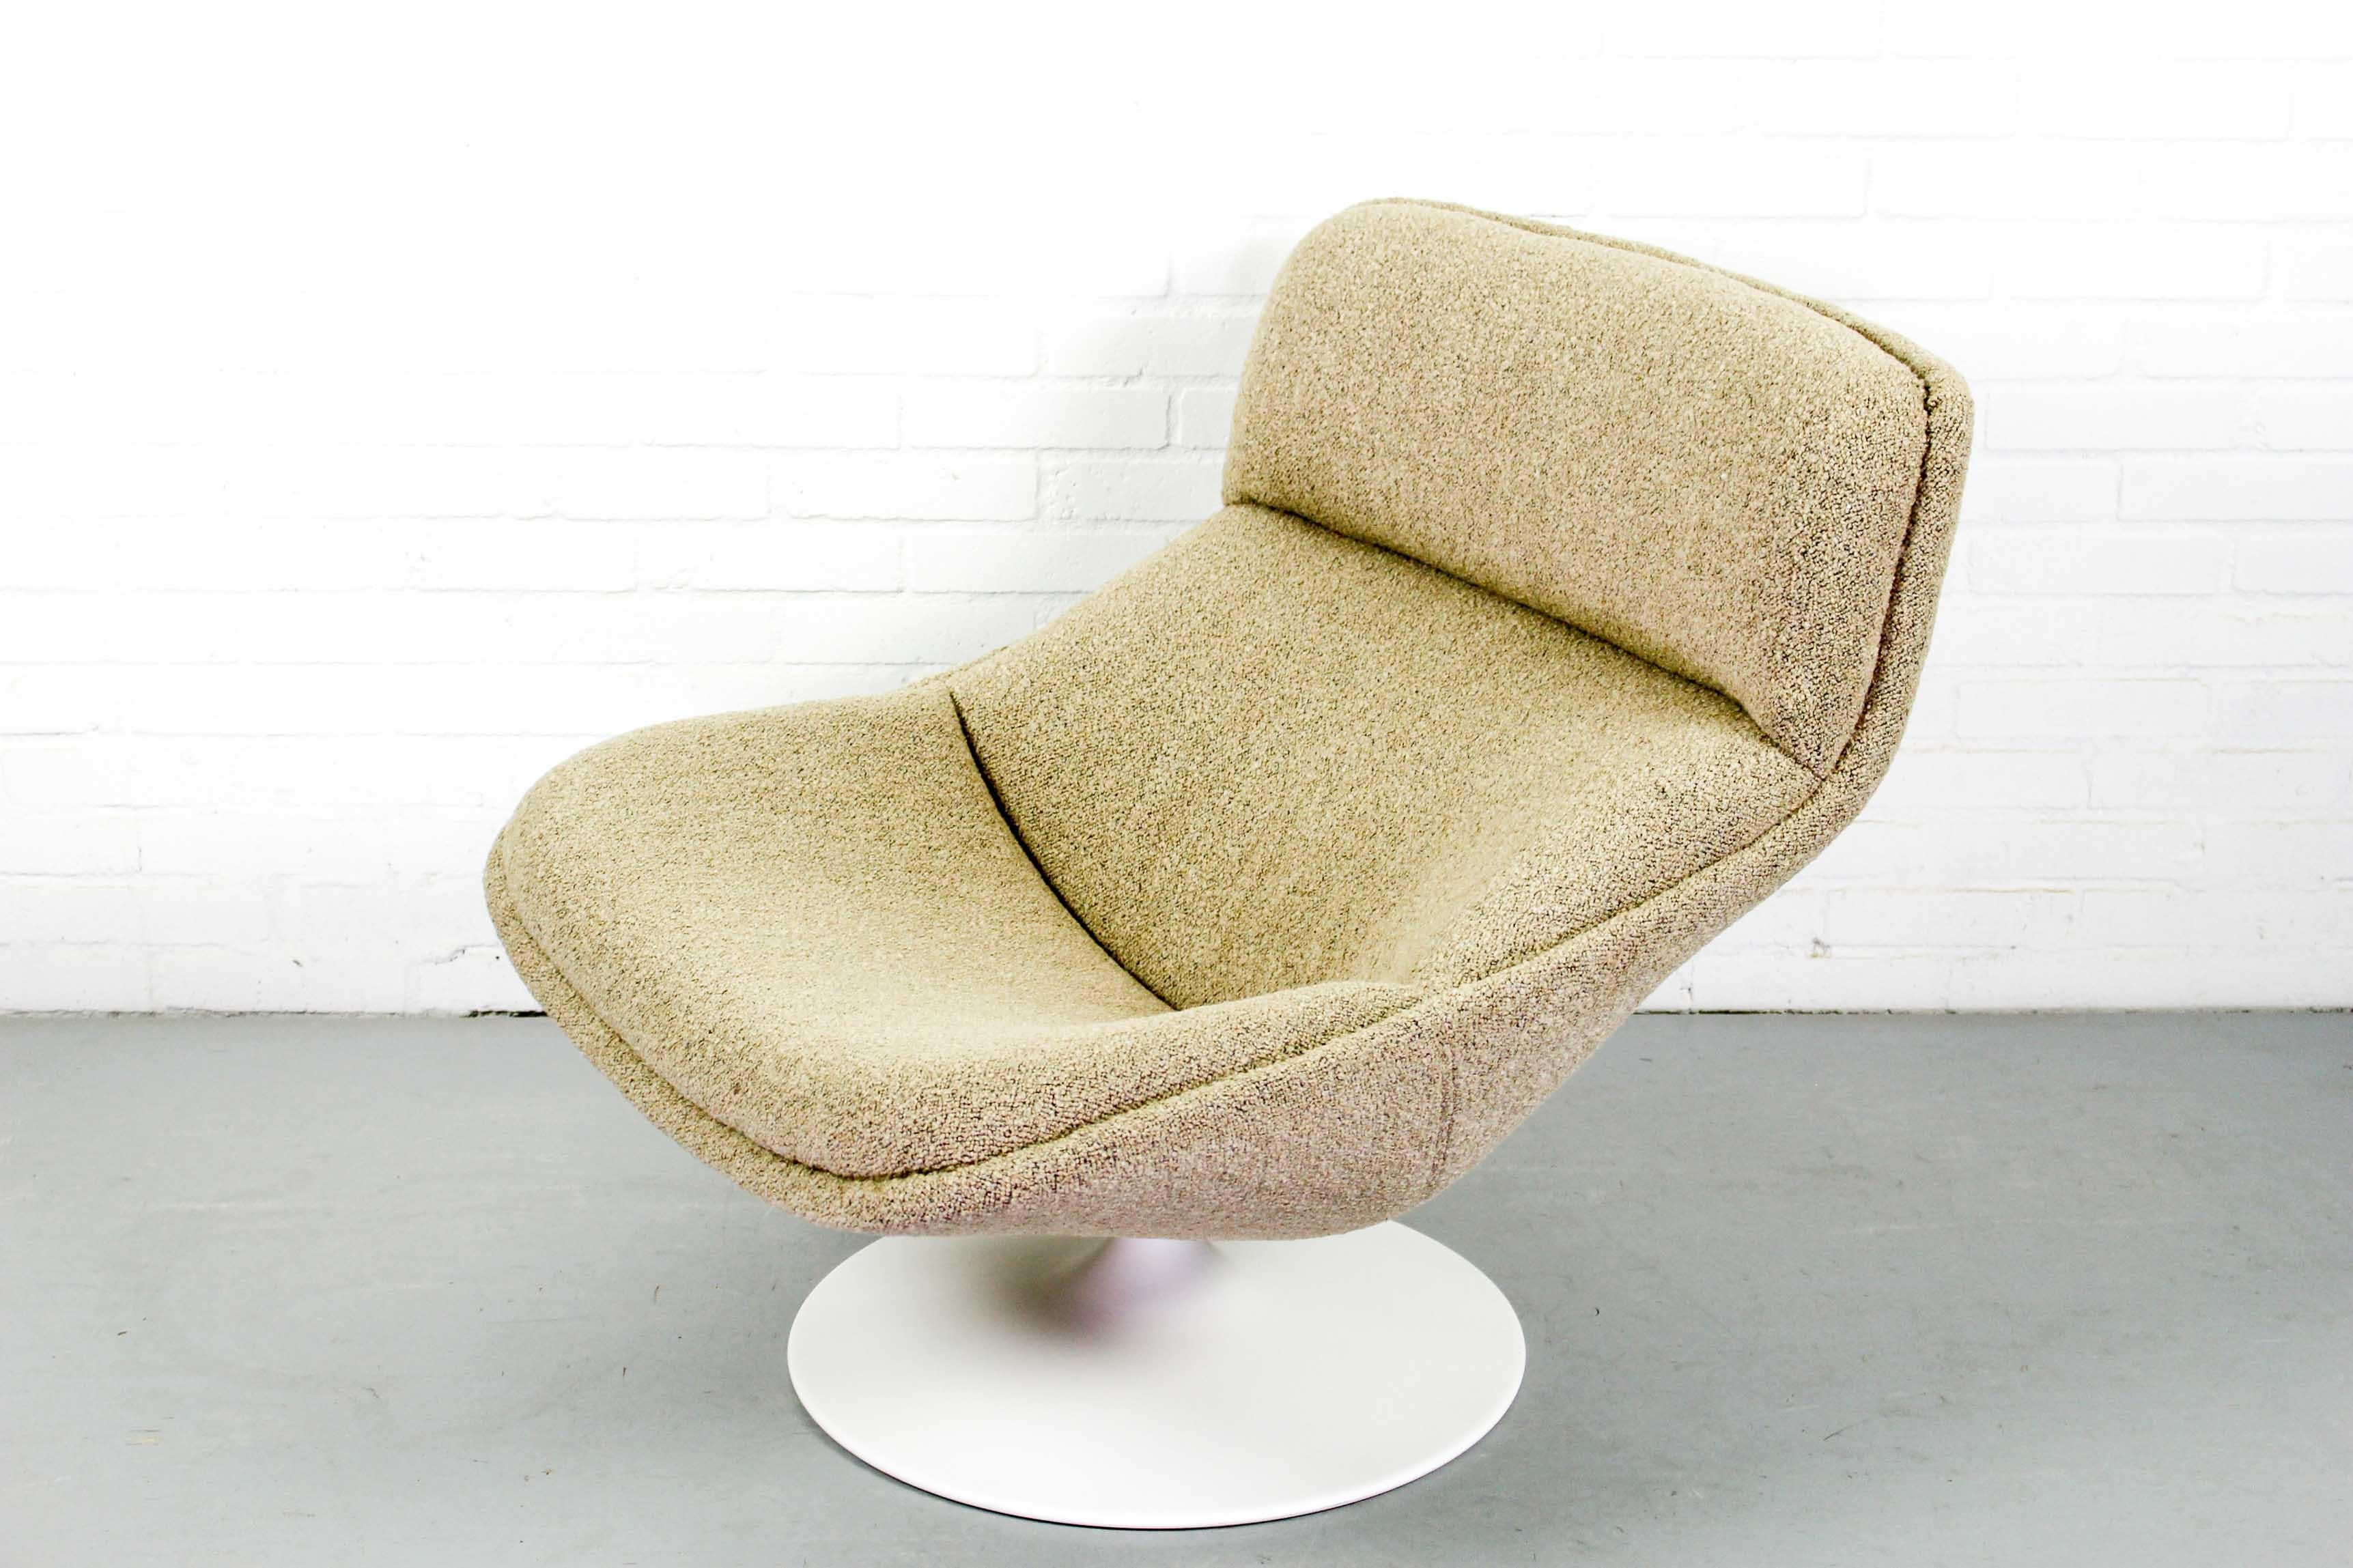 Lounge Swivel chair by Geoffrey Harcourt for Artifort, 1970s. Model F522. This chair has a metal round base and is reupholsterd with high quality boucle fabric (Designtex Lambert color: Latte BOUCLE). In a very good vintage condition. Looks great in